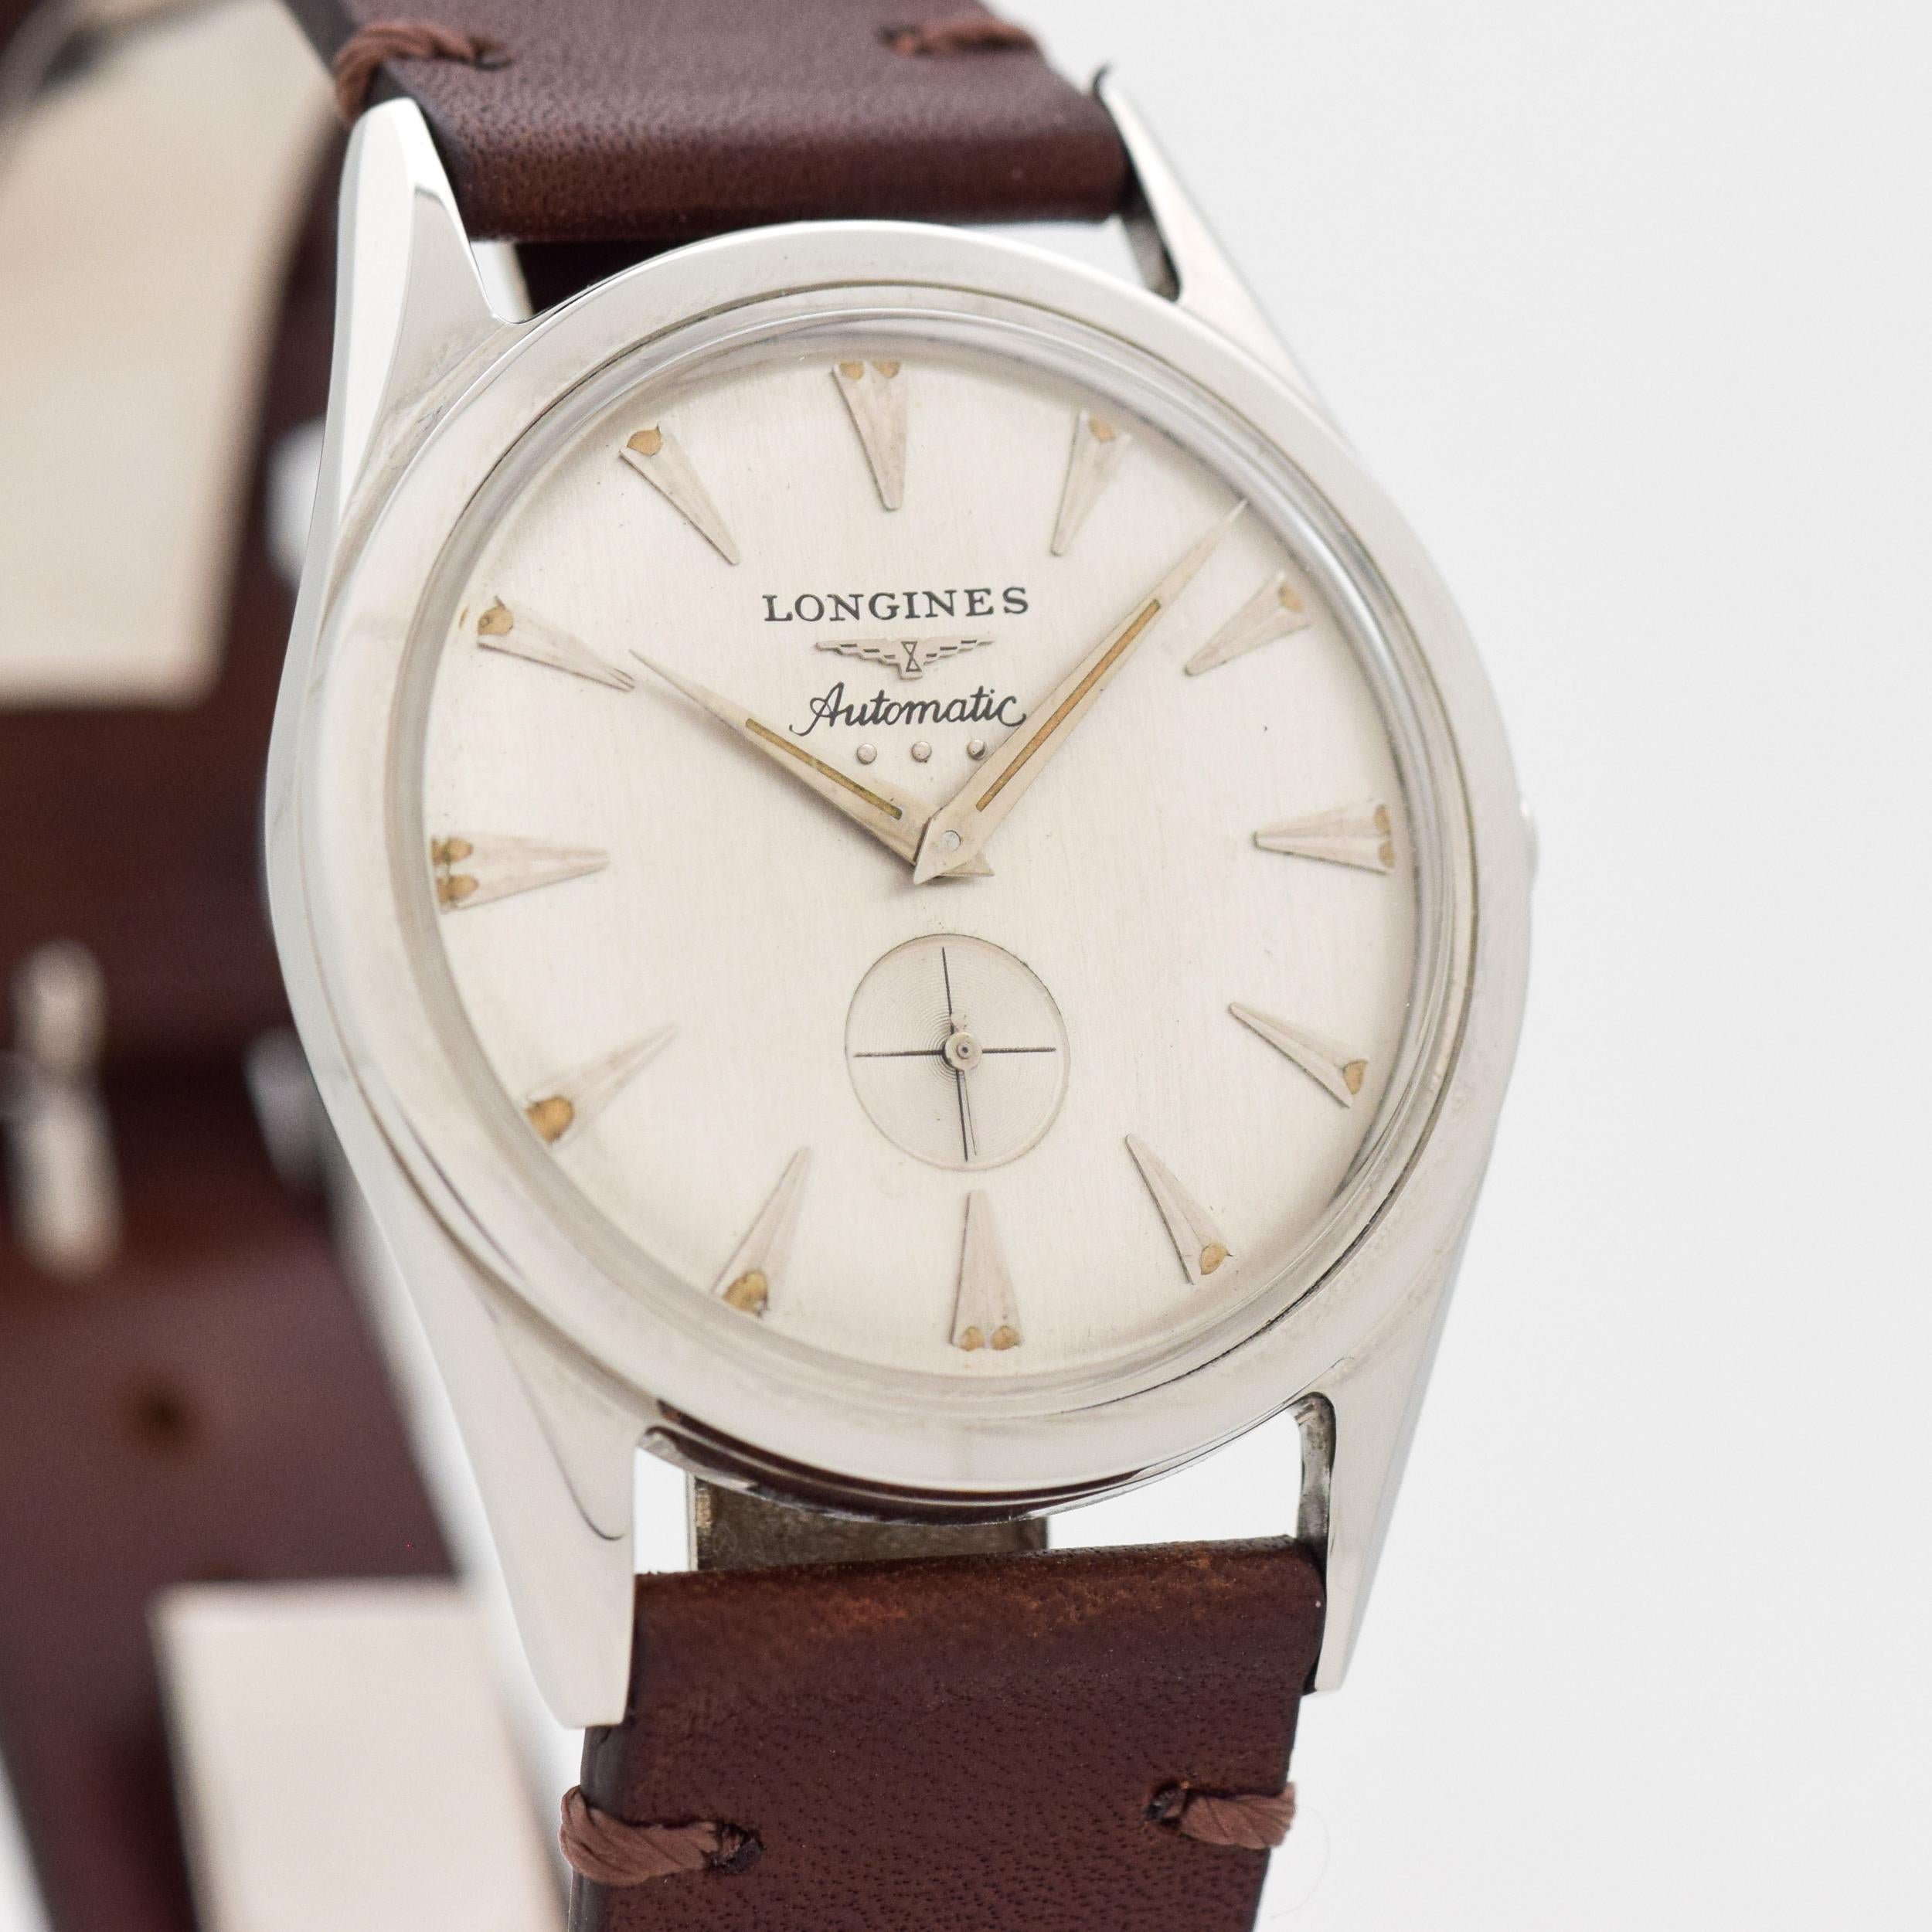 1956 Vintage Longines Ref. 2220-P Stainless Steel watch with Original Solver Dial with Allied Steel Beveled Triangle Markers. 33mm x 41mm lug to lug (1.3 in. x 1.61 in.) - 20 jewel, automatic caliber movement. Equipped with a Horween Genuine Leather